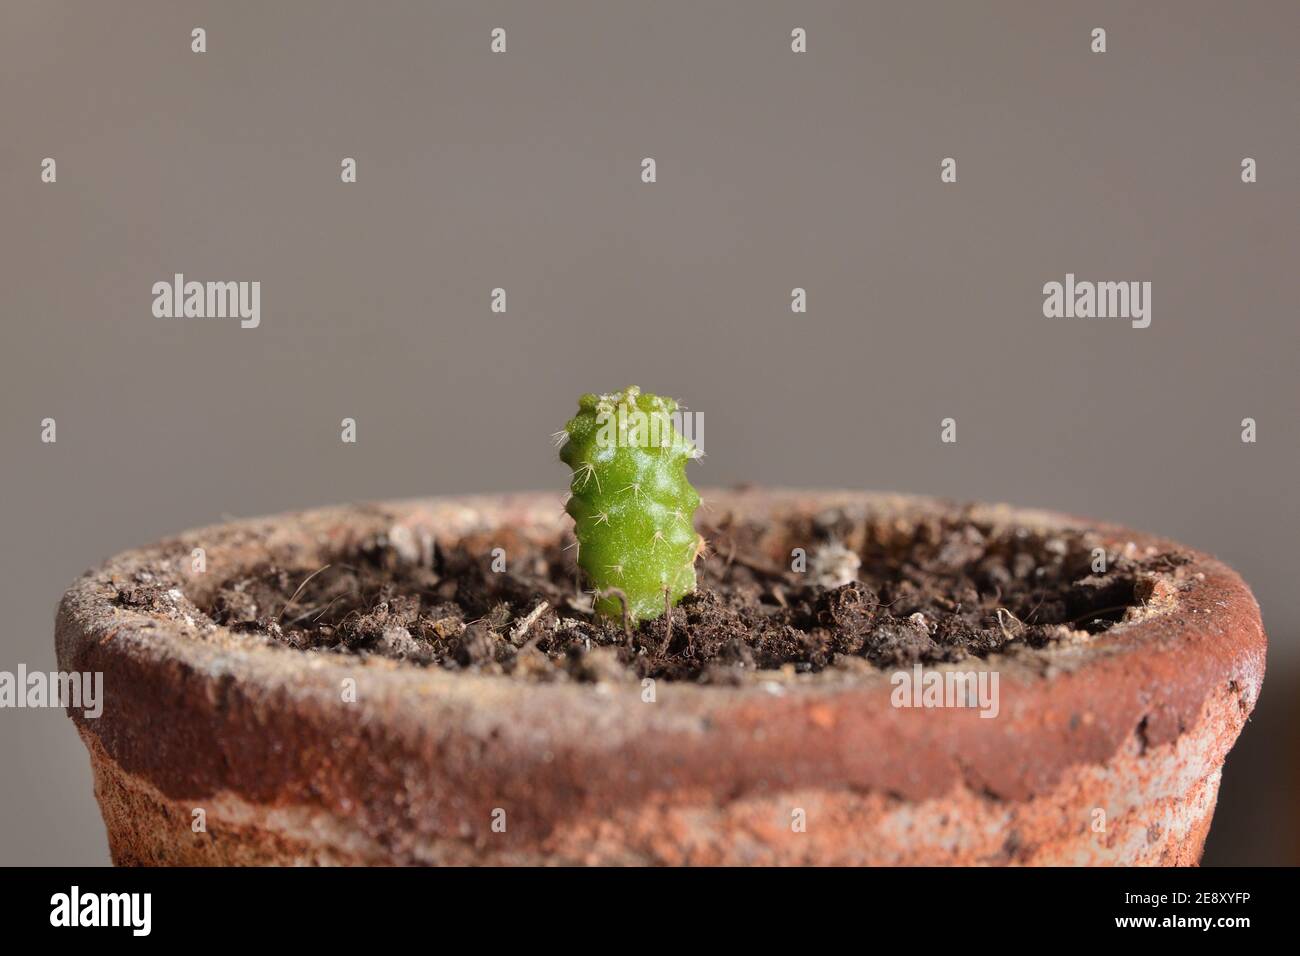 Close up of one year old cactus Echinocactus Grusonii in a terracotta pot and gray background. Botanical concept Stock Photo